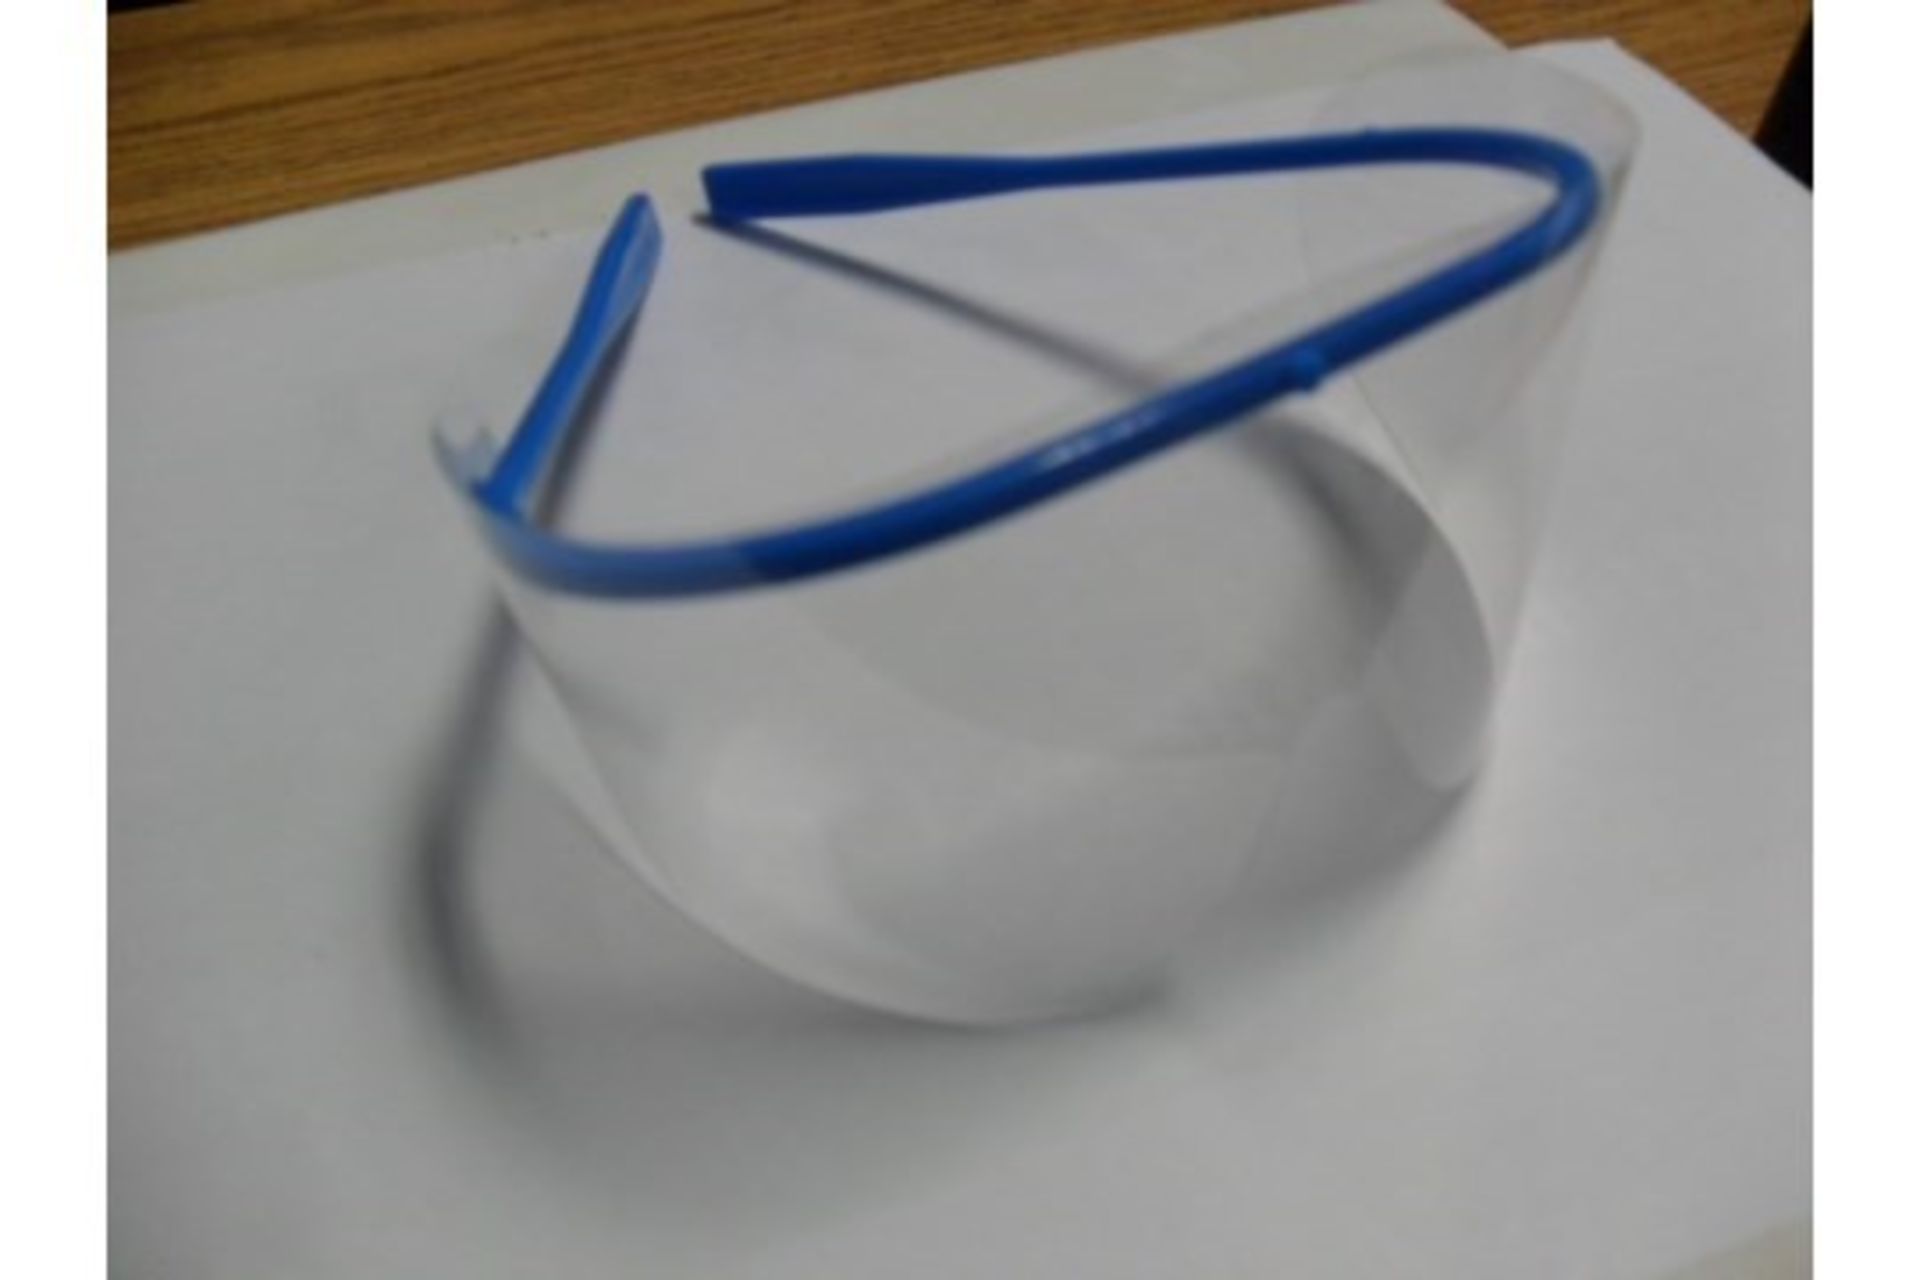 BOX OF 50 X MCKINNON MEDICAL EYE SHIELD AND FRAME (PROTECTIVE DISPOSABLE GLASSES) - Image 3 of 3